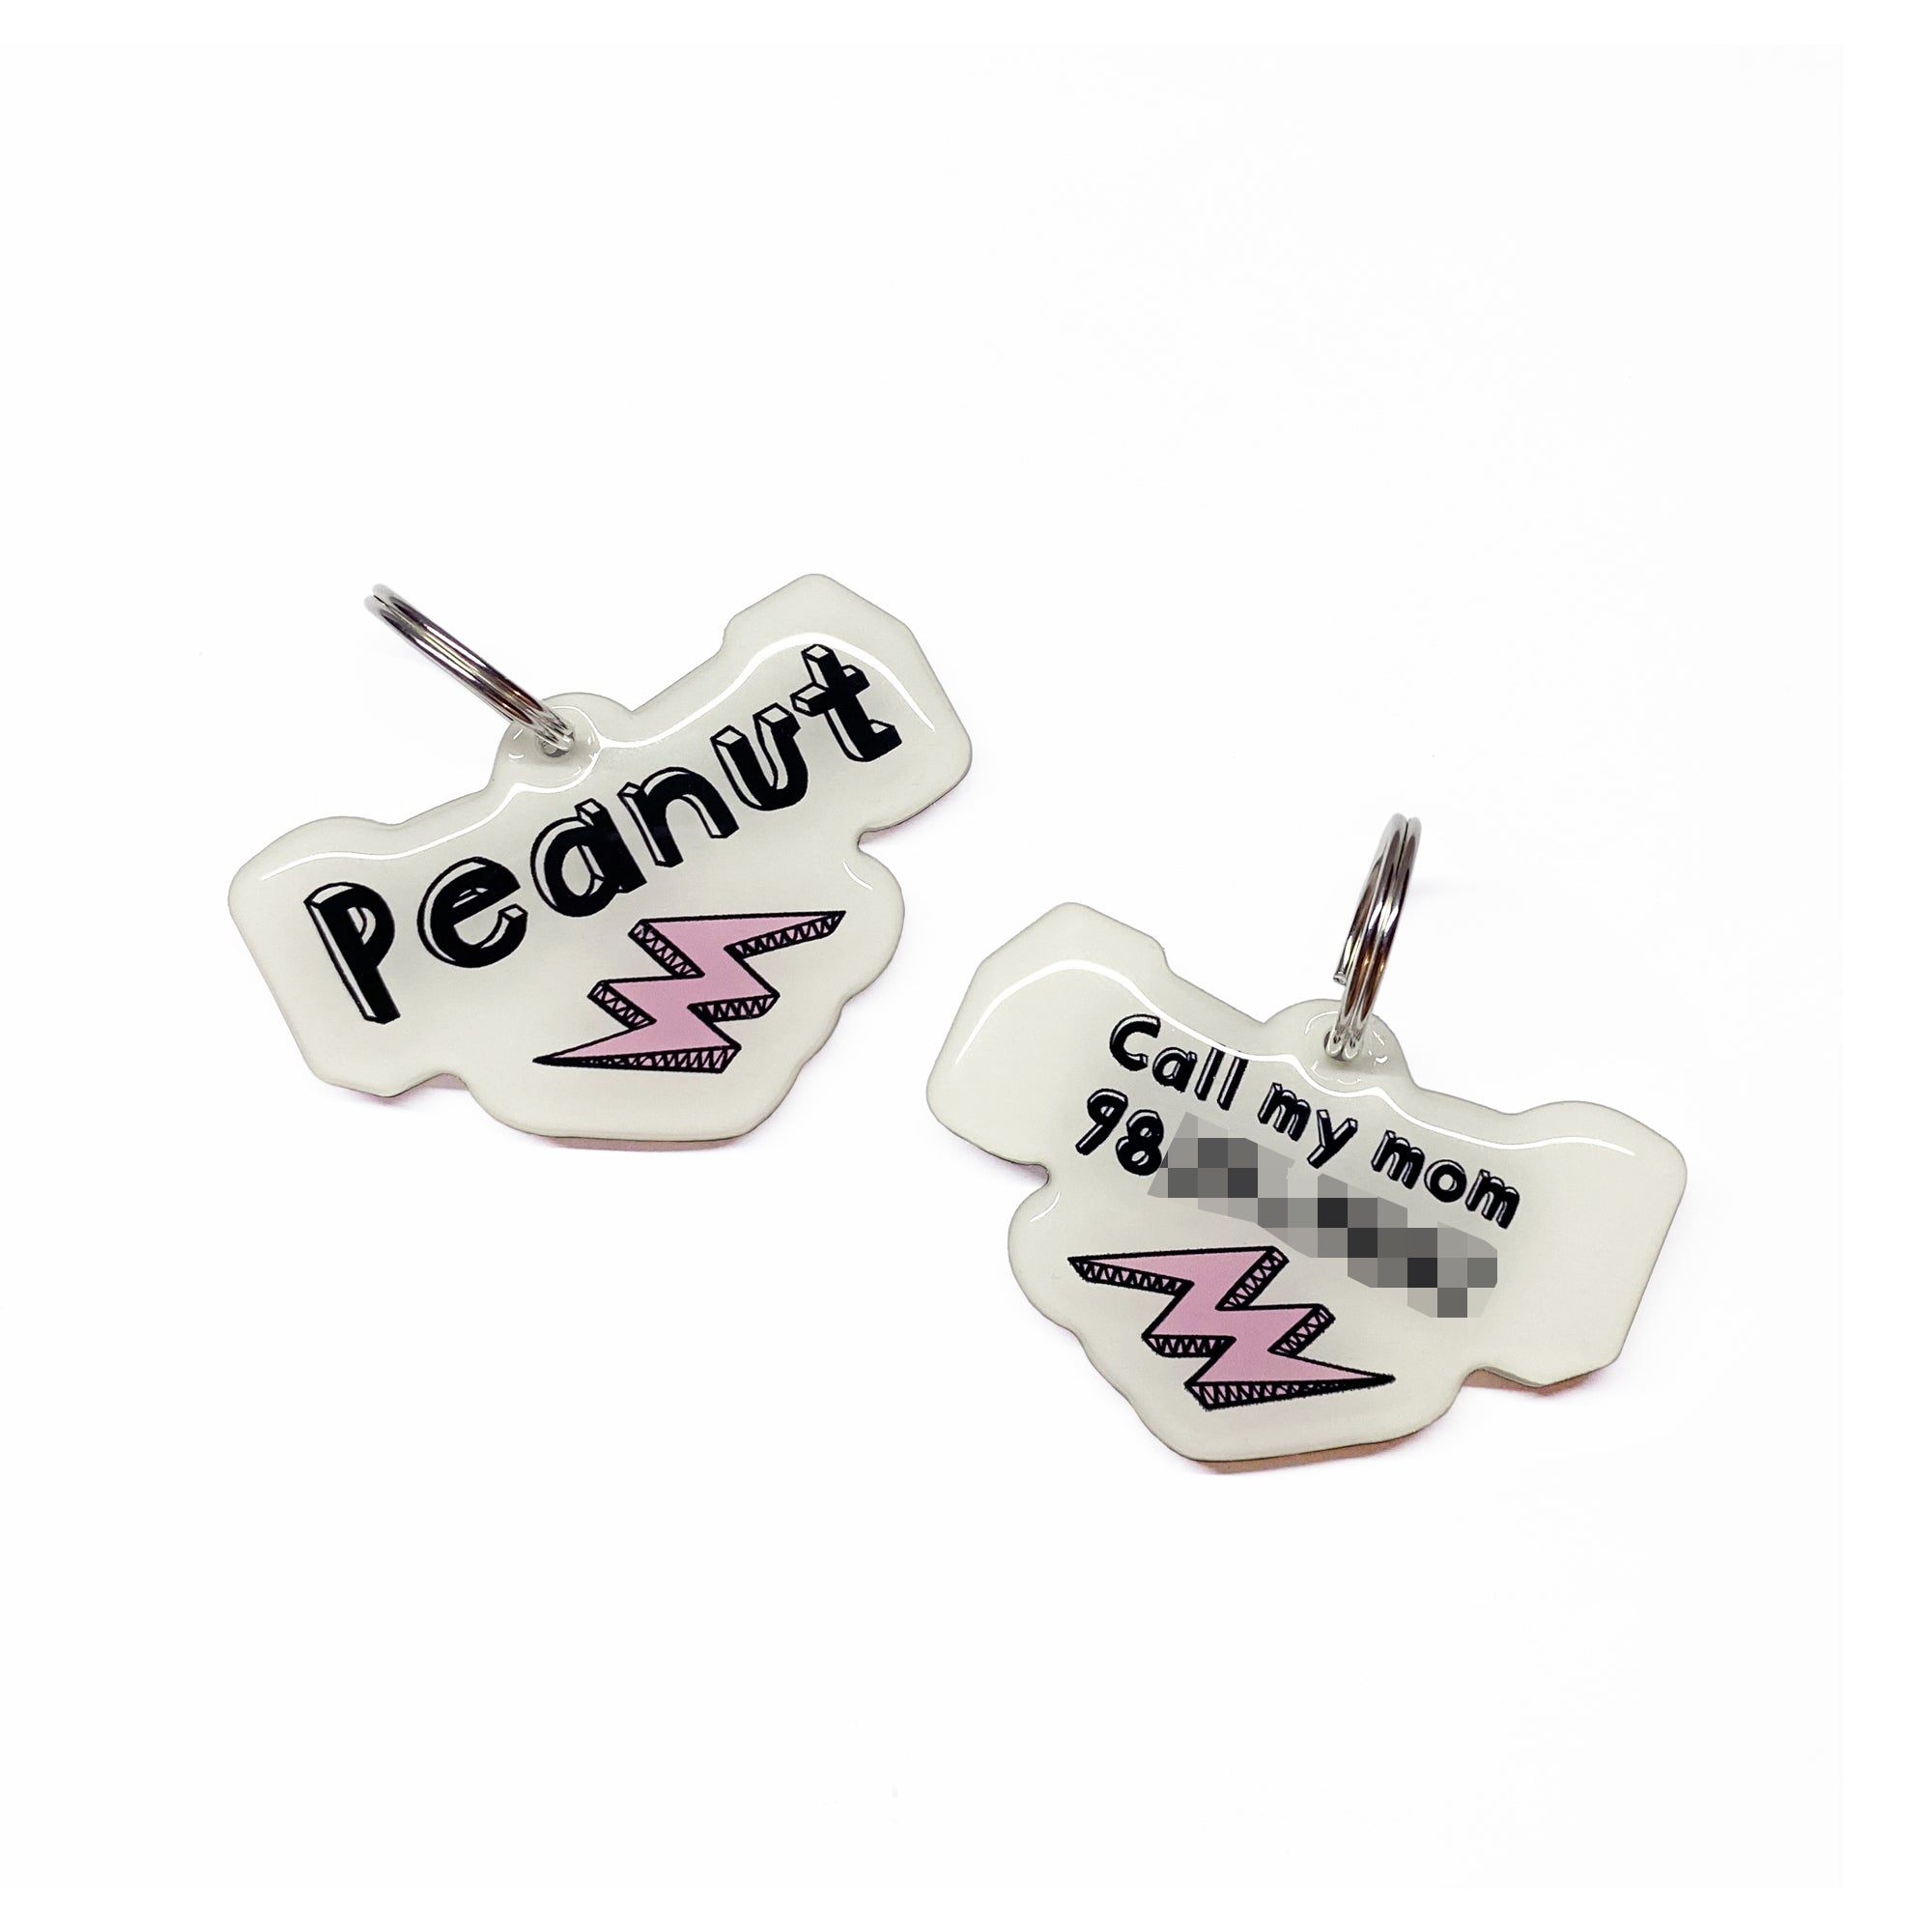 White + Baby Pink Lightning Bolt - 2x Tags Dog Name Tags by Bashtags